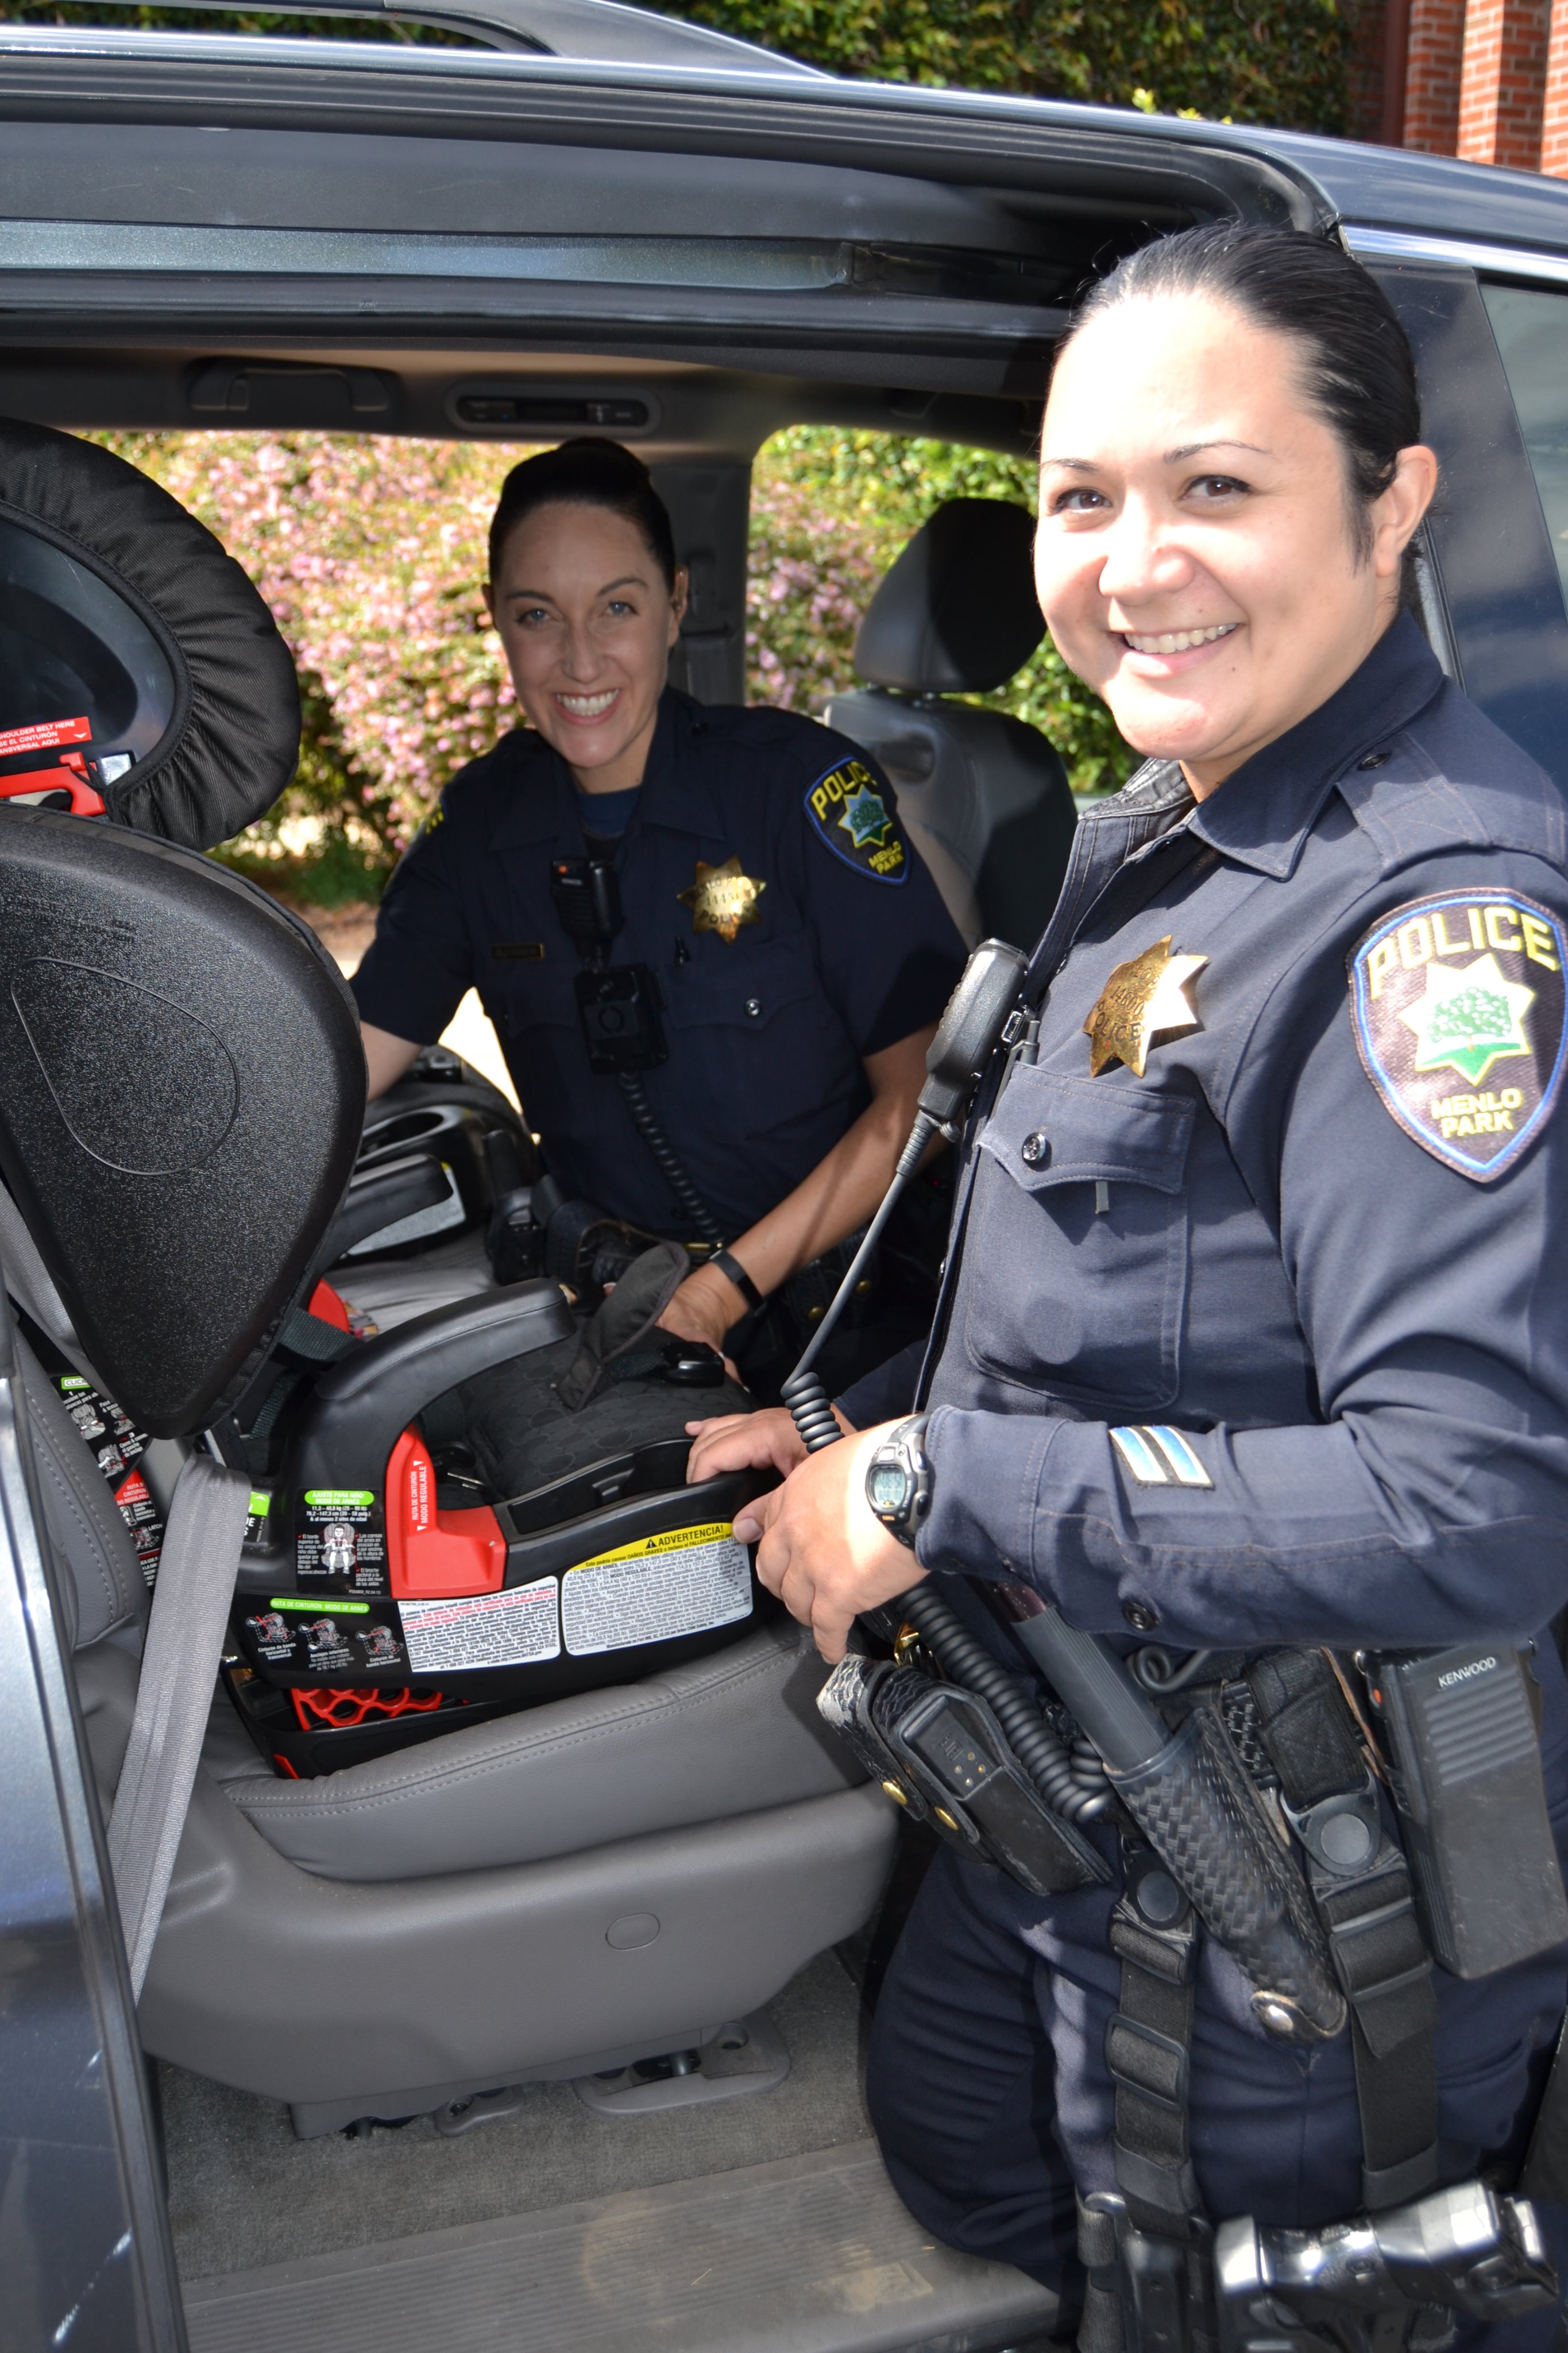 Menlo Park PD on Twitter: "Child Passenger Safety week is from Sept. 23-29  where police highlight car seat safety for parents, caregivers.  @MenloParkPD is having a free child safety seat inspection/installation  event